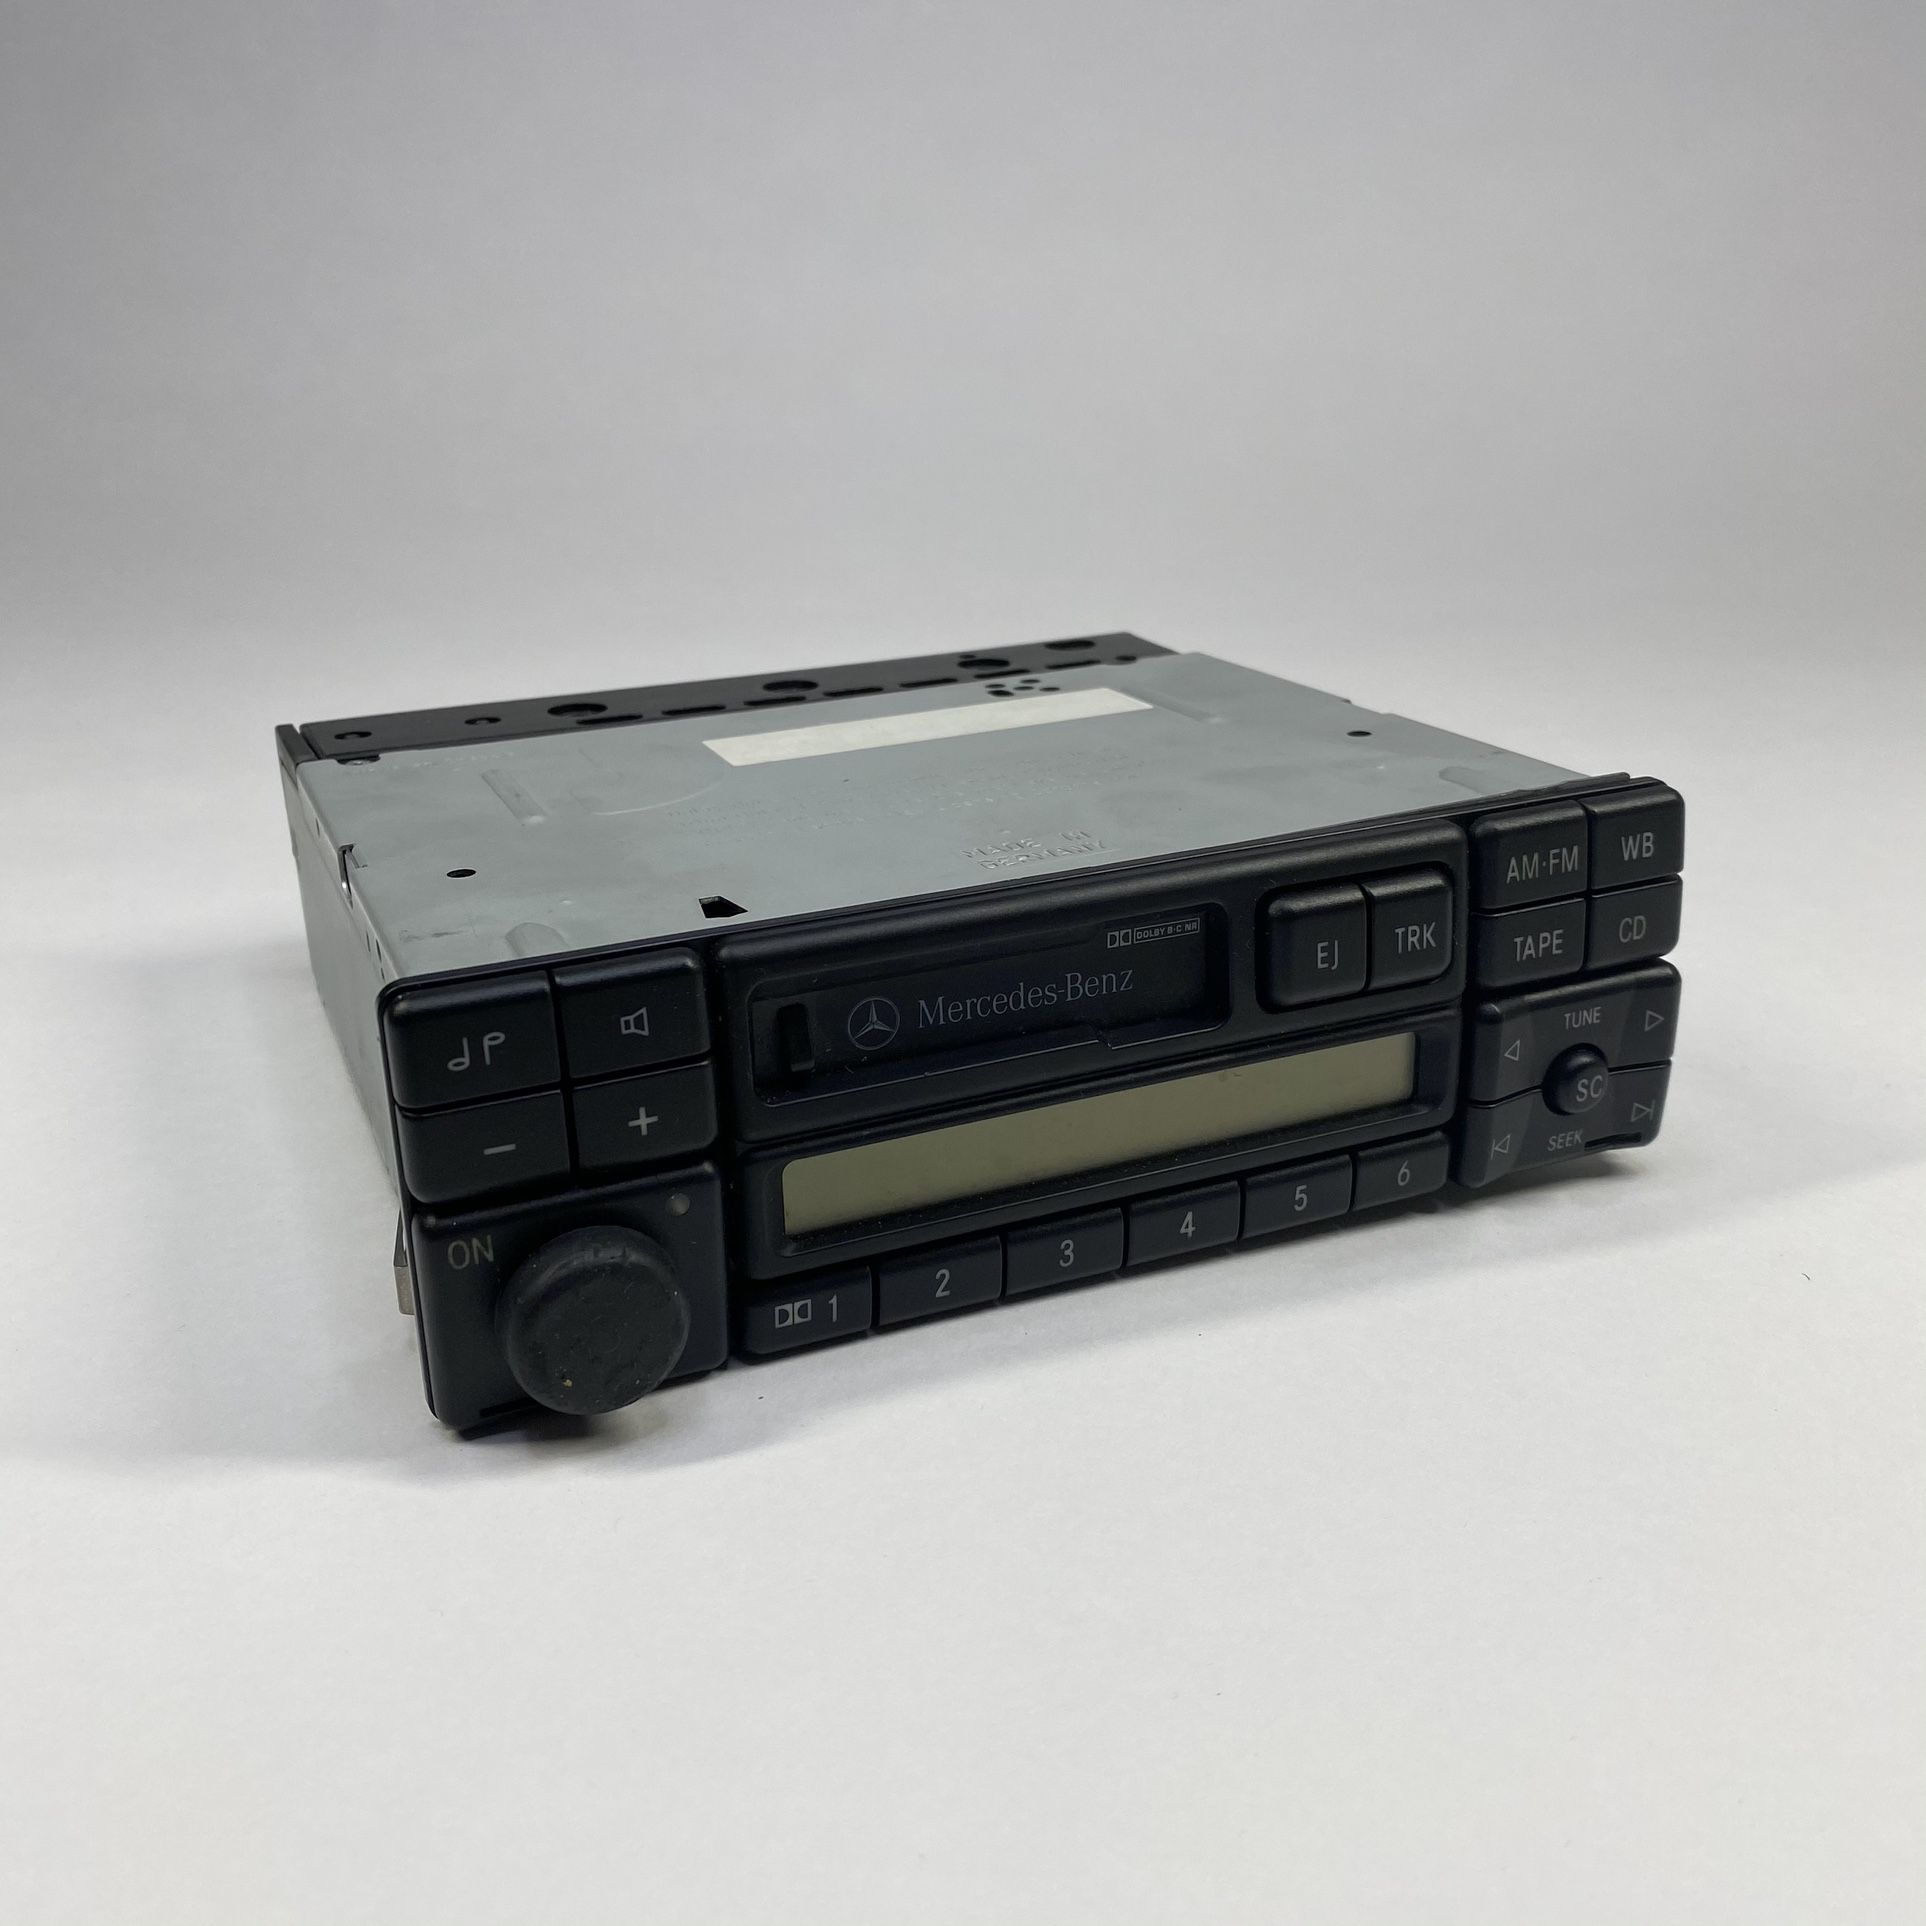 Mercedes Benz BE1692 Becker Radio Cassette Player Untested As Is